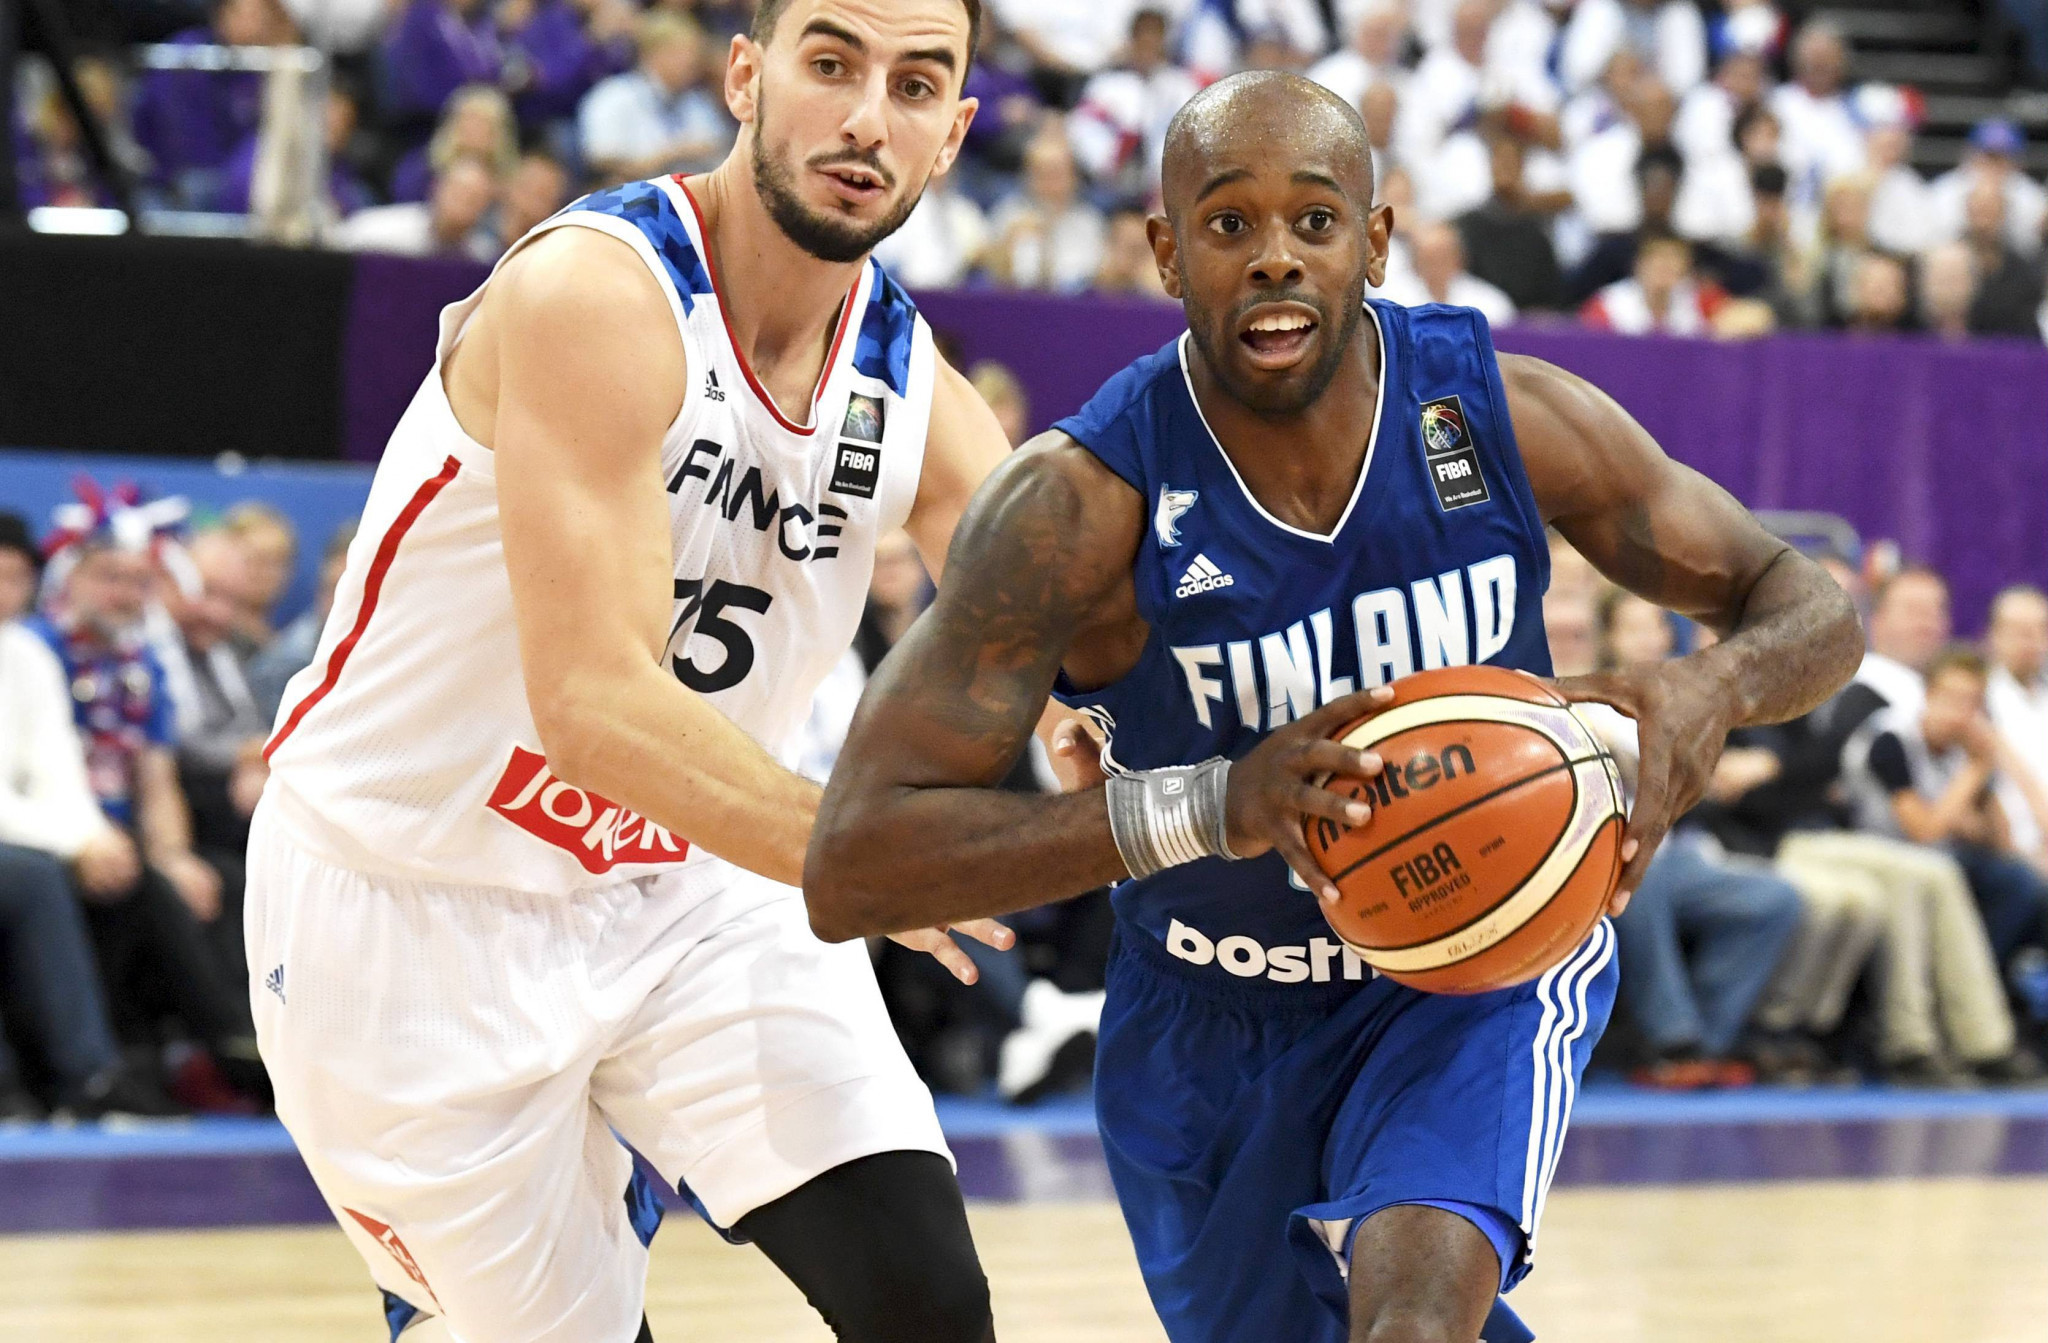 Finland stunned France on day one of EuroBasket ©Getty Images